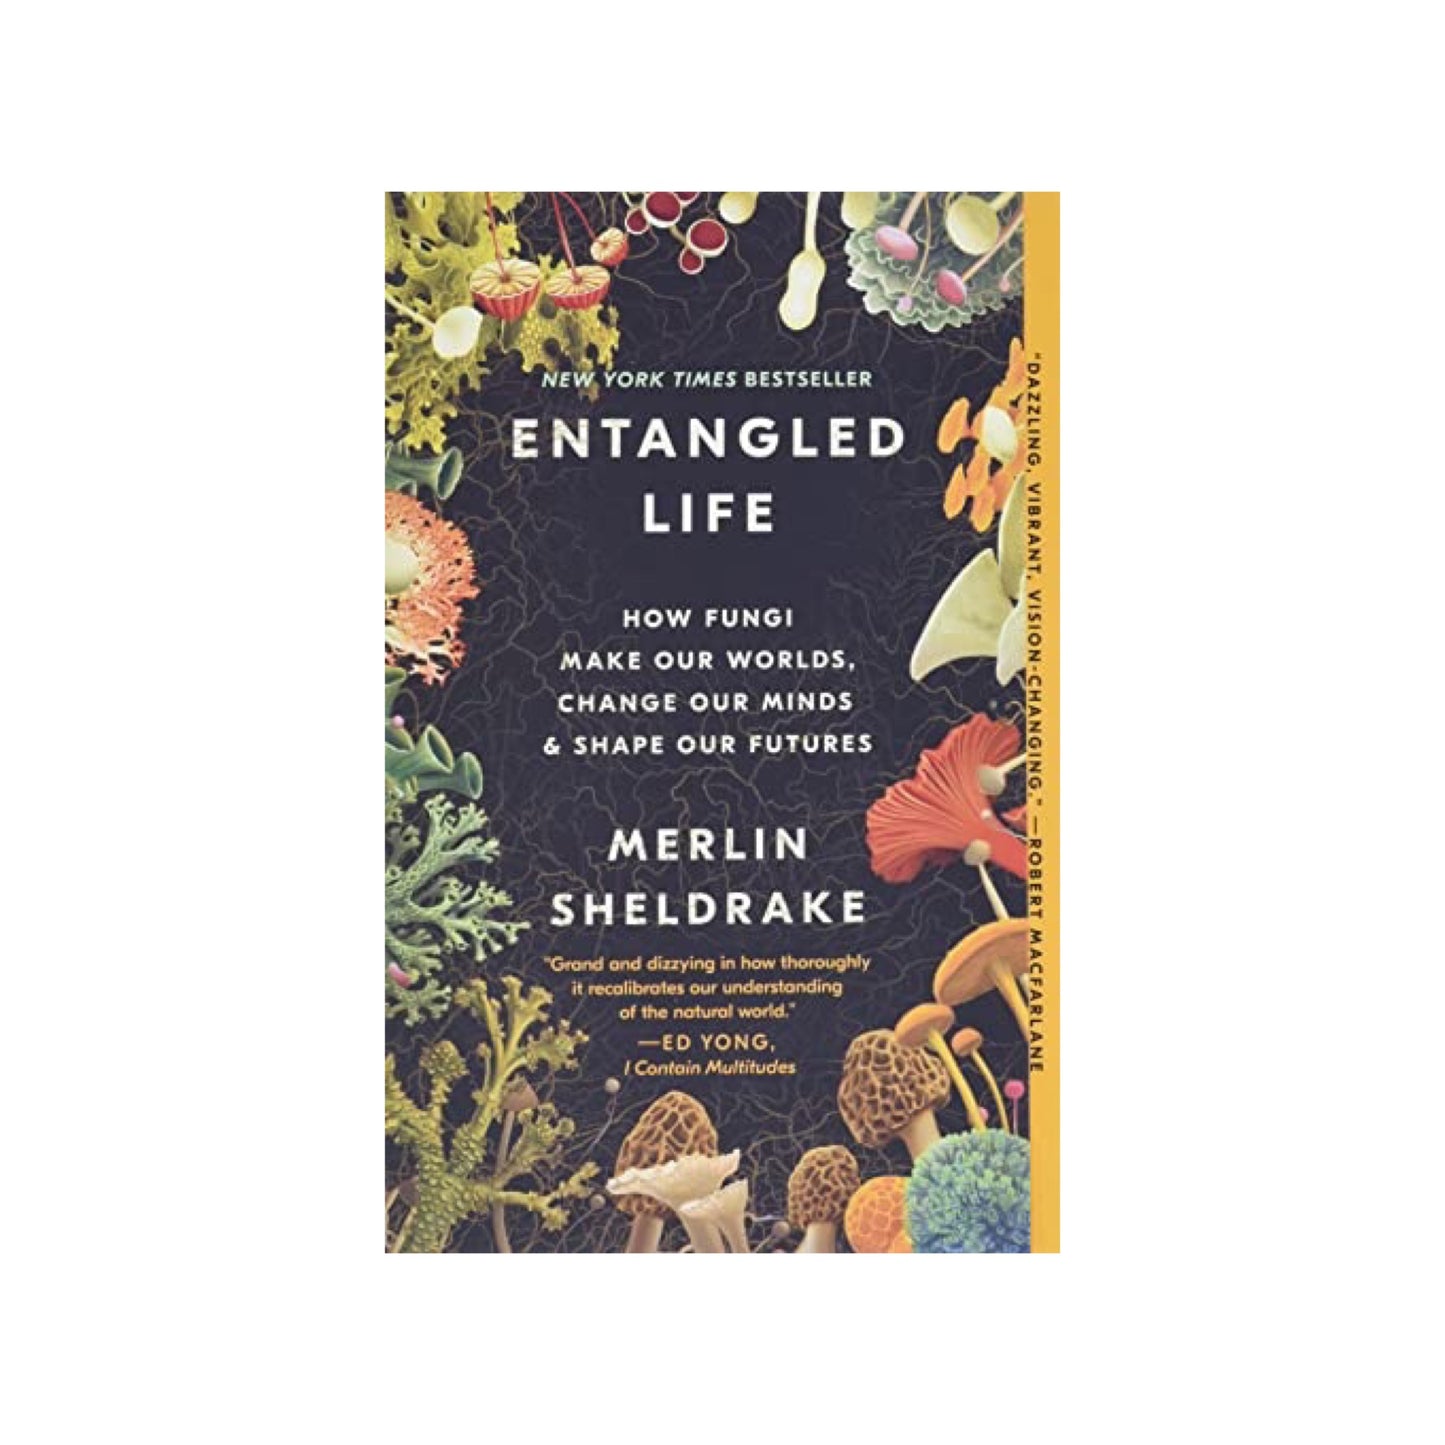 entangled life: how fungi make our worlds, change our minds & shape our futures